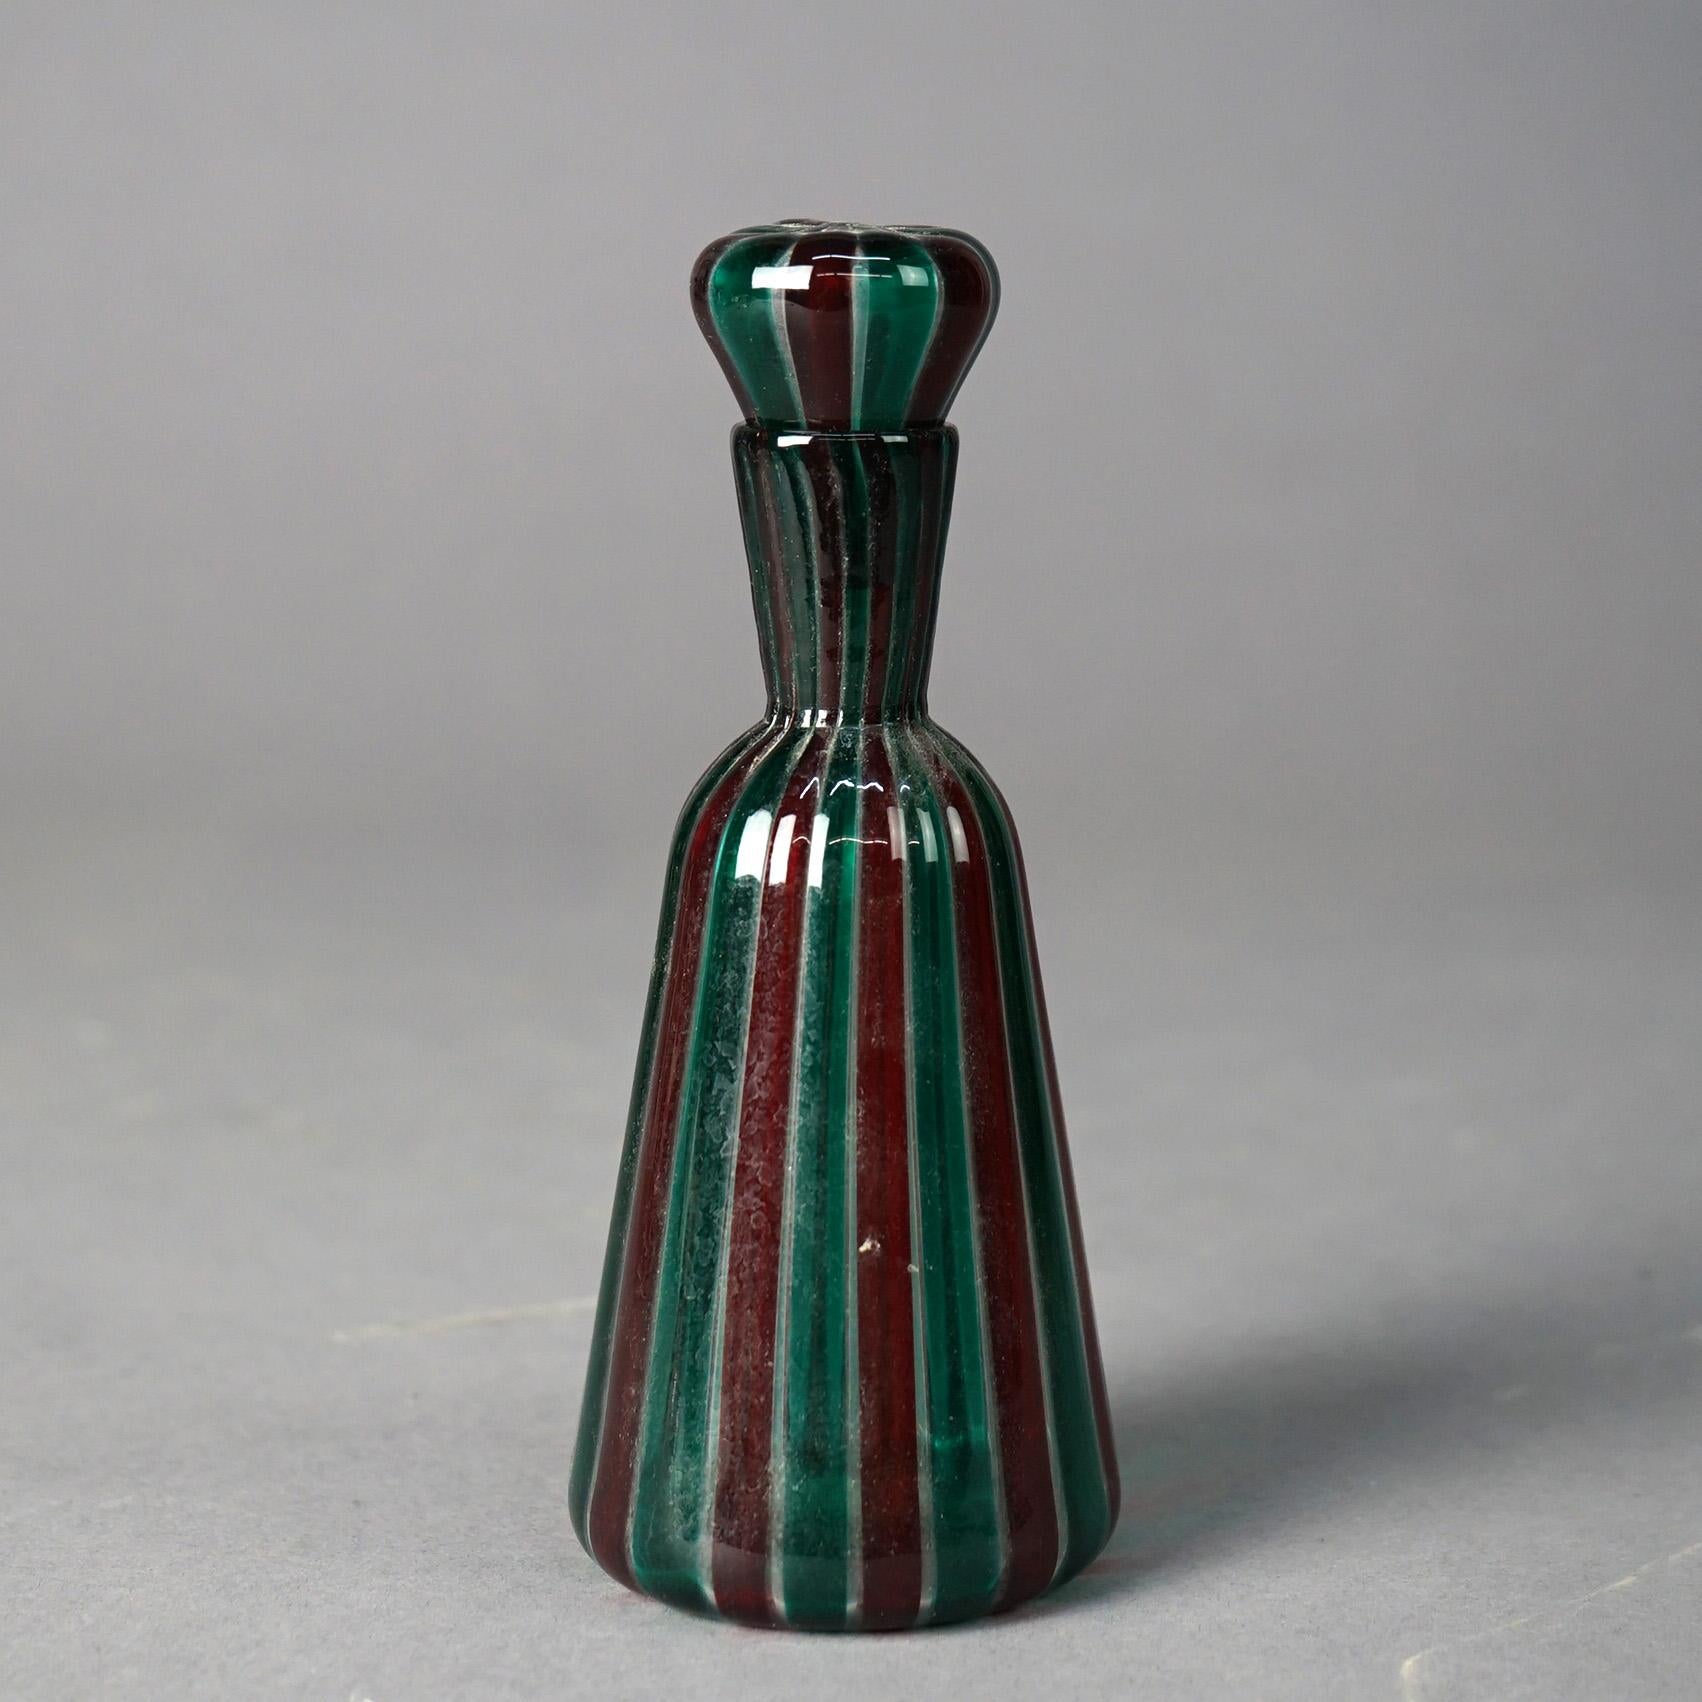 Venetian Murano Art Glass Perfume Offers Striped Art Glass Construction with, 20th C

Measures - 6.5